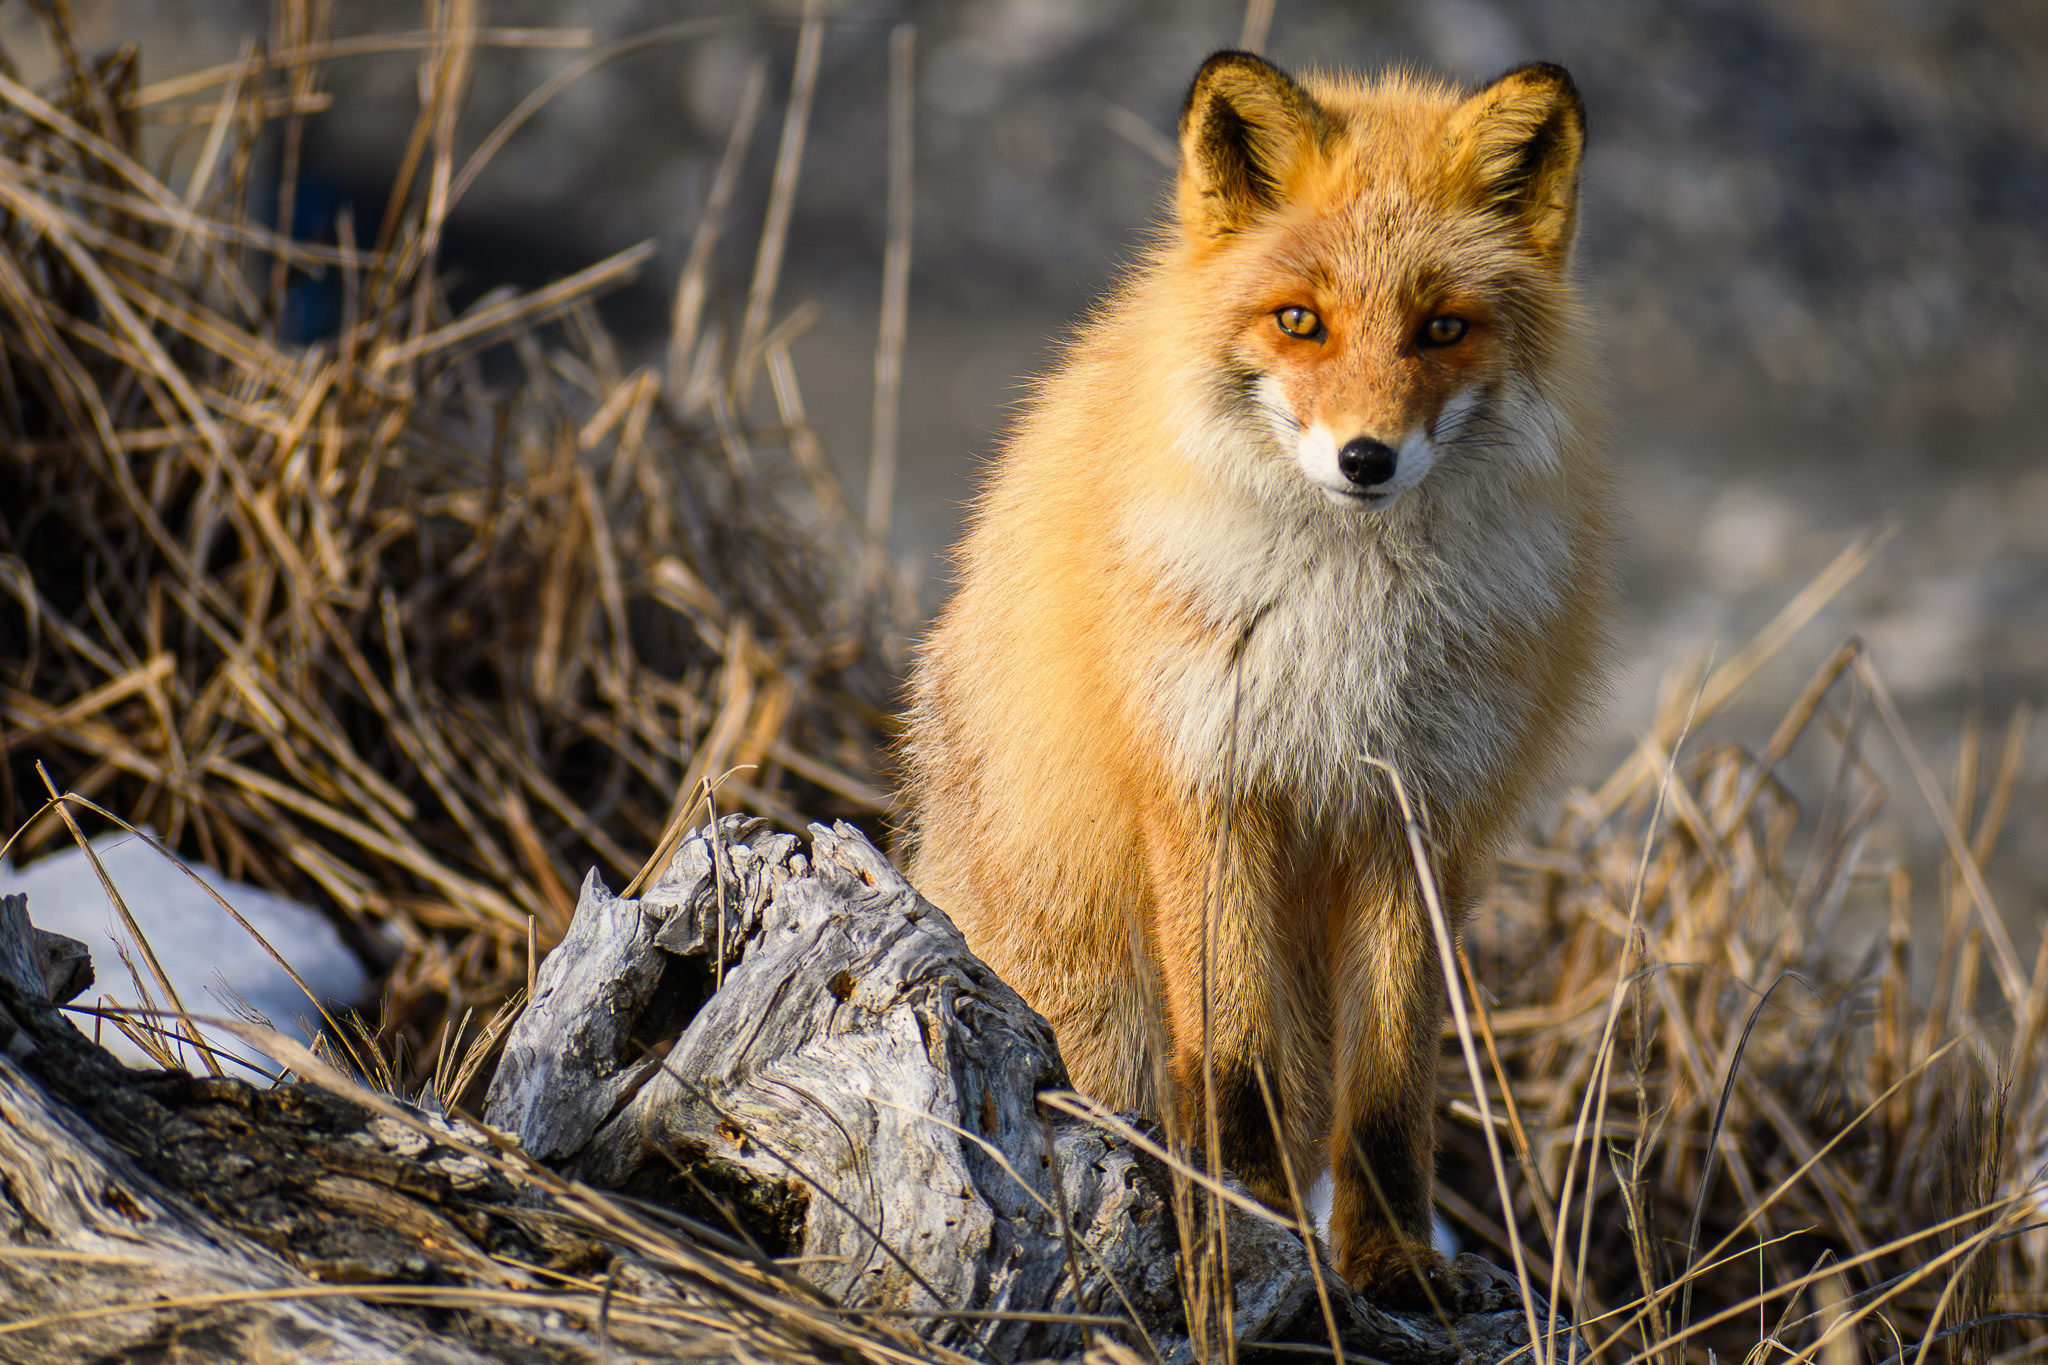 A red fox emerges from some grasses, staring directly at the viewer.